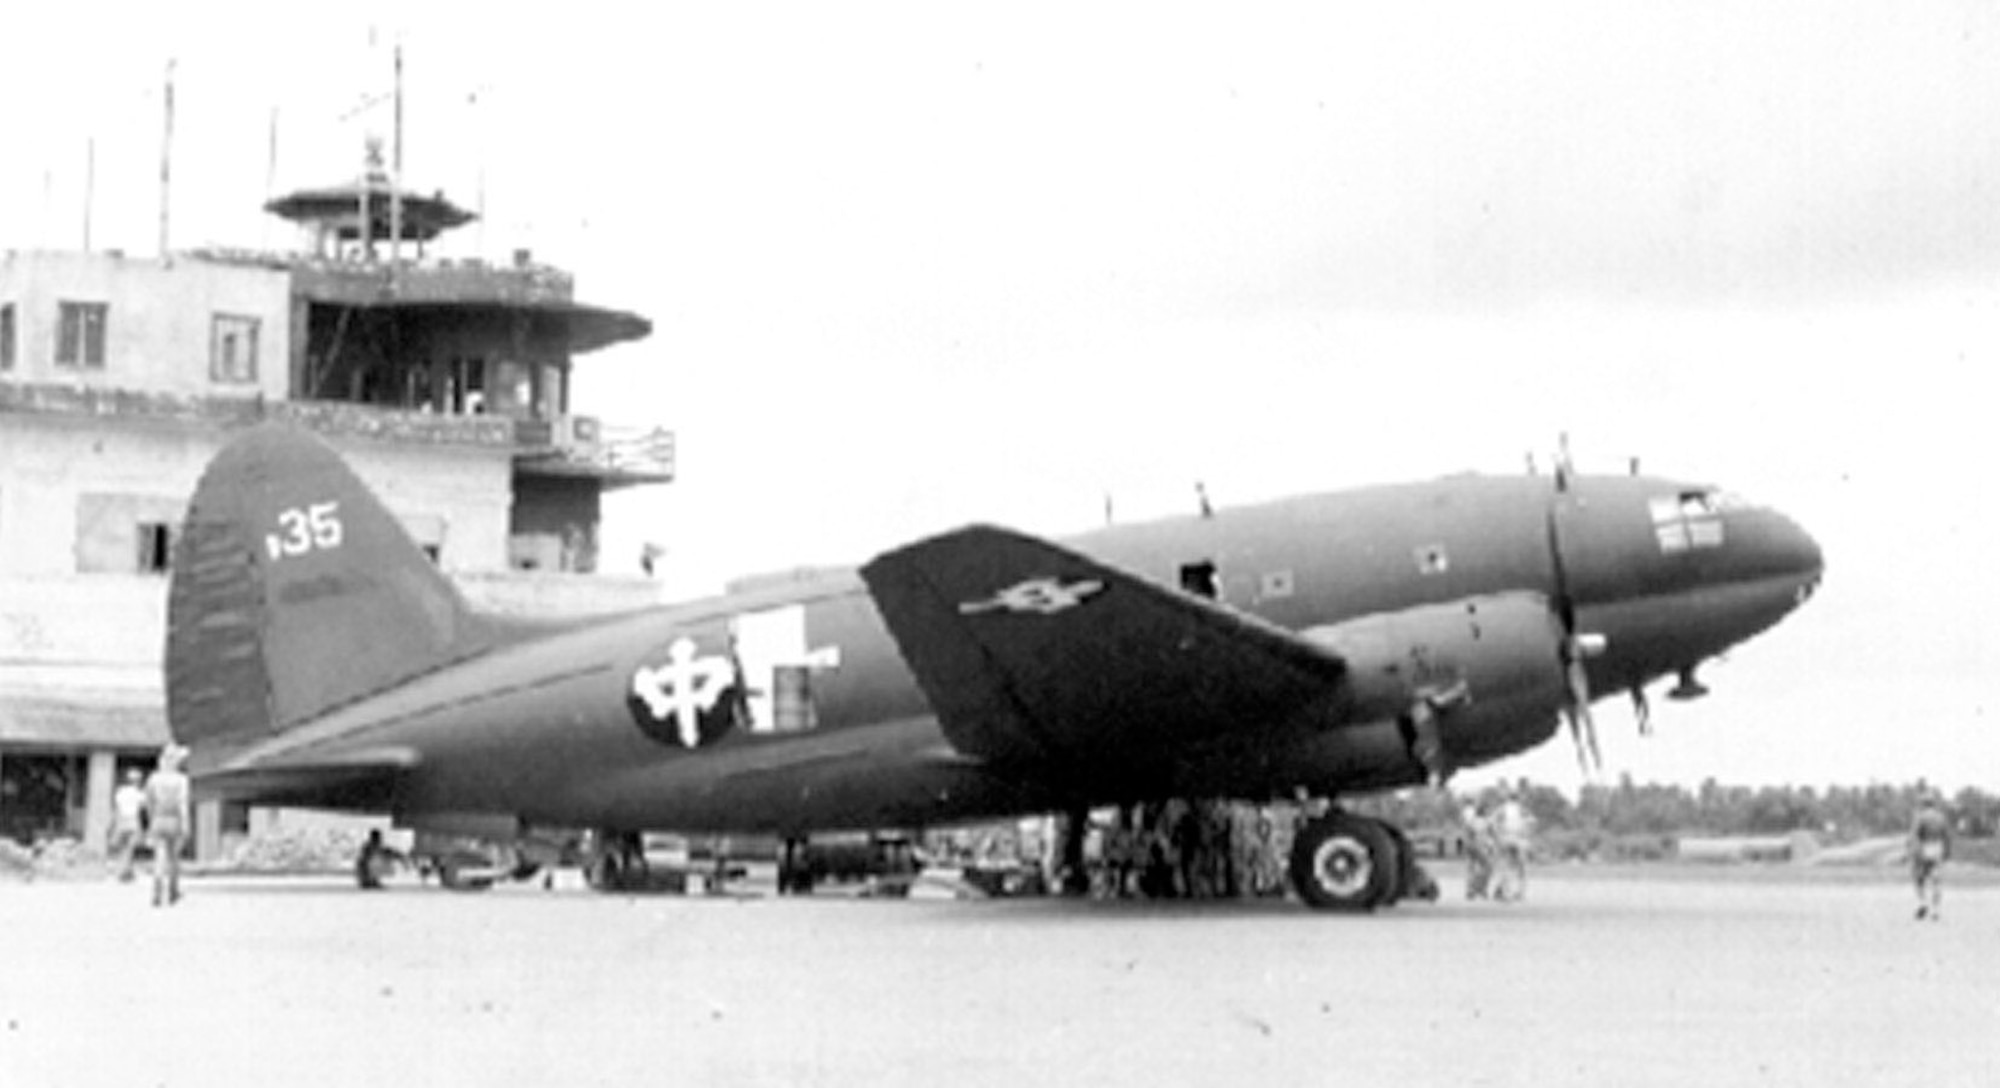 CNAC Curtiss C-46 Commando cargo aircraft being unloaded in China. CNAC carried over 10 percent of all cargo and personnel over the "Hump." (Photo courtesy of cnac.org)